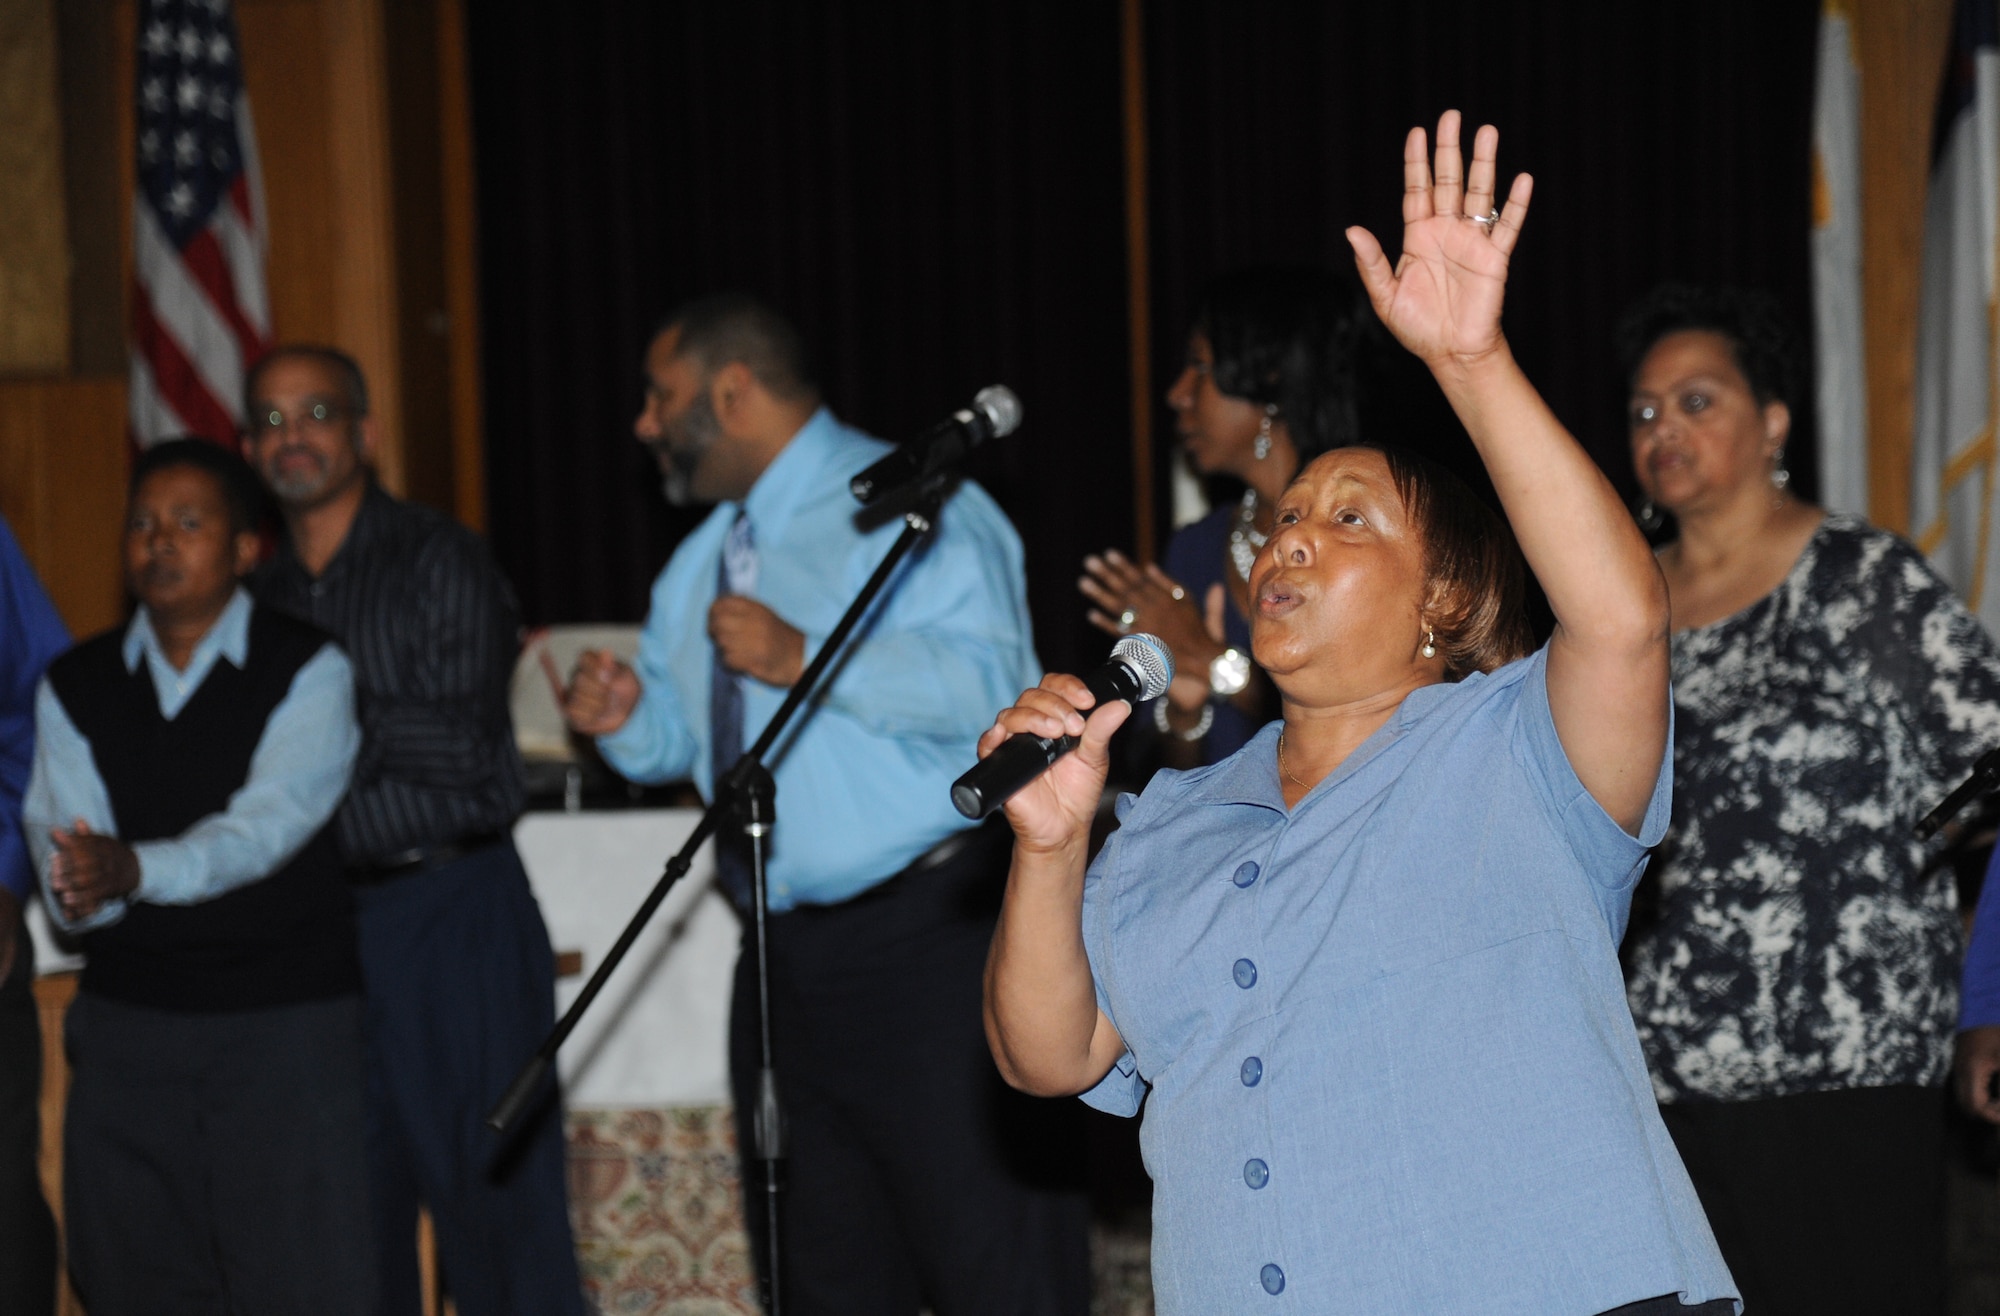 Sabrena Davis, Keesler Gospel Choir member, leads the choir during the 2015 Gospel Concert Jan. 31, 2015, at the Triangle Chapel, Keesler Air Force Base, Miss.  The African American Heritage Committee hosted the praise and worship service to celebrate Black History Month. (U.S. Air Force photo by Kemberly Groue)